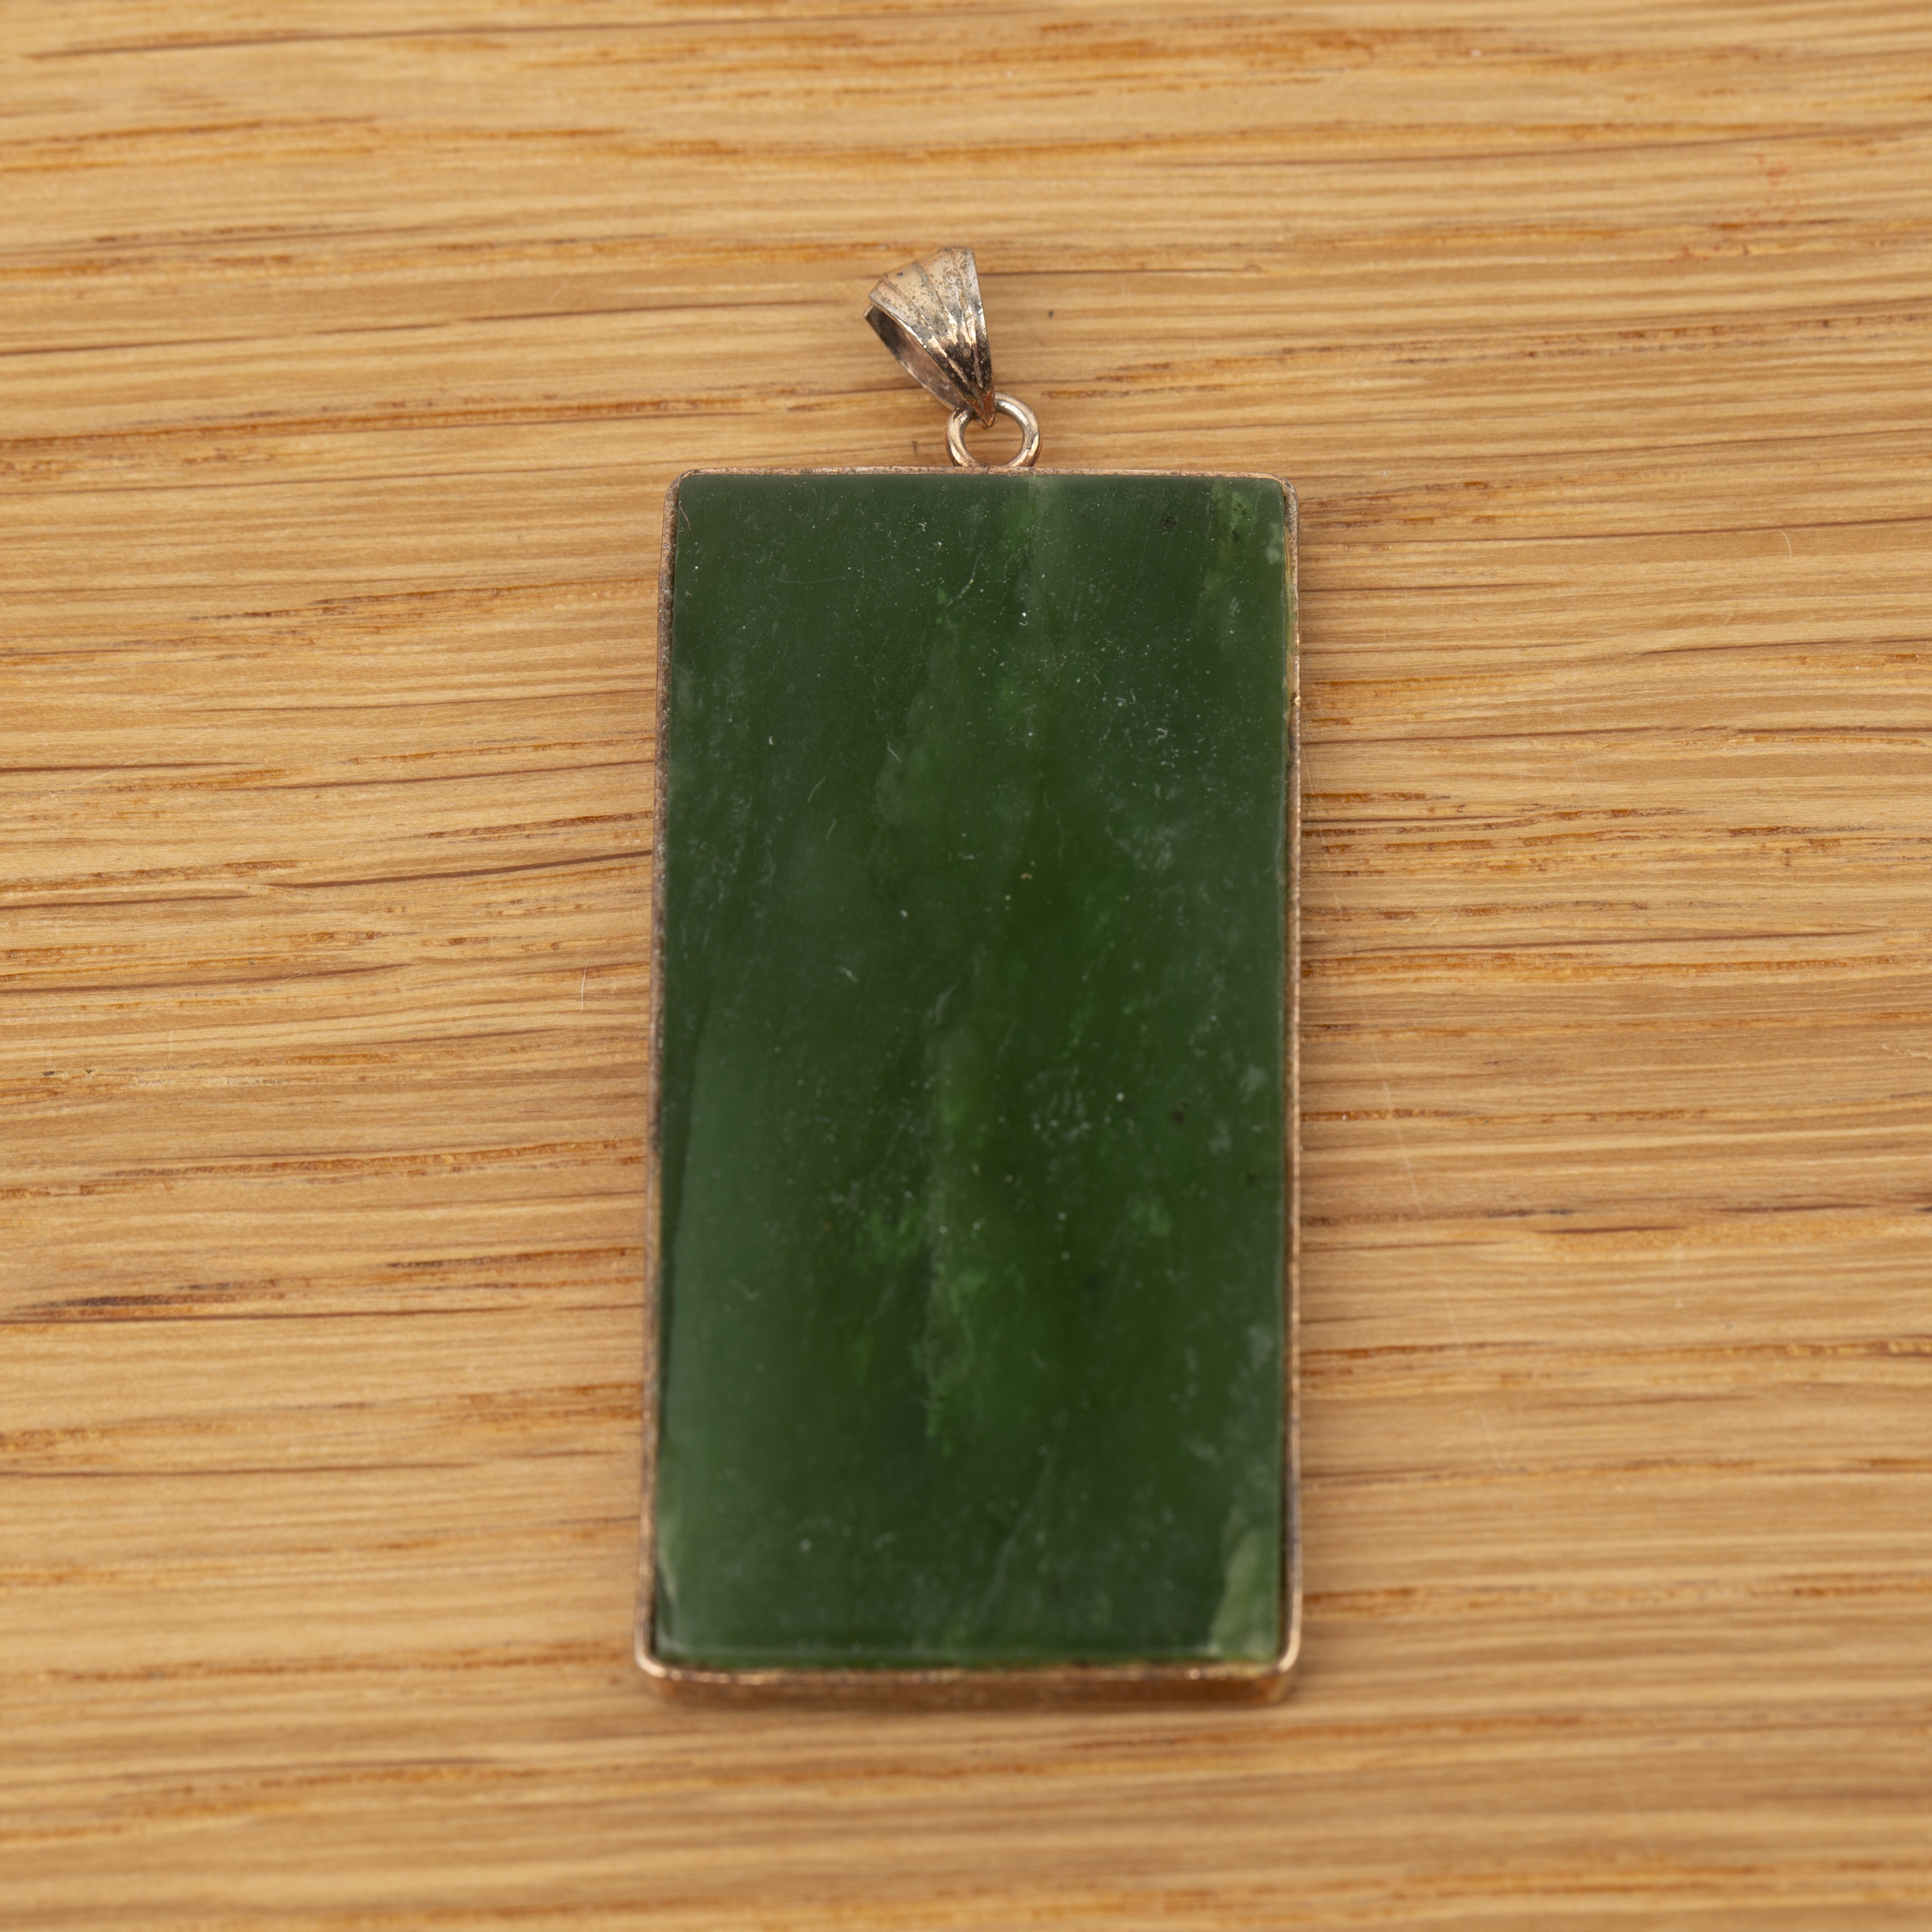 Spinach jade rectangular pendant Chinese, 20th Century with yellow metal mounts and three - Image 2 of 2